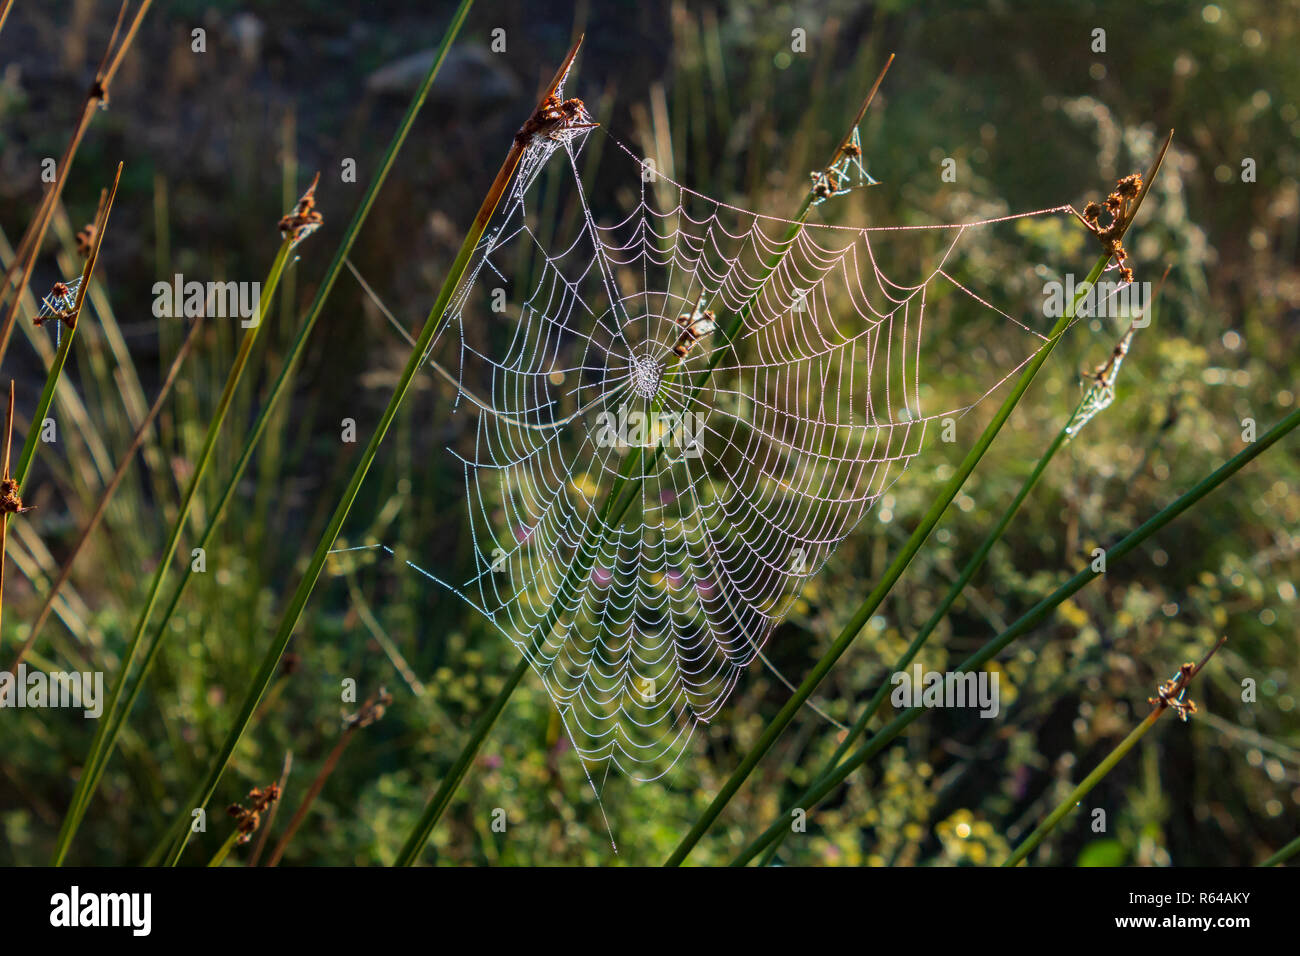 Spiders Web in Early Morning Dew Stock Photo